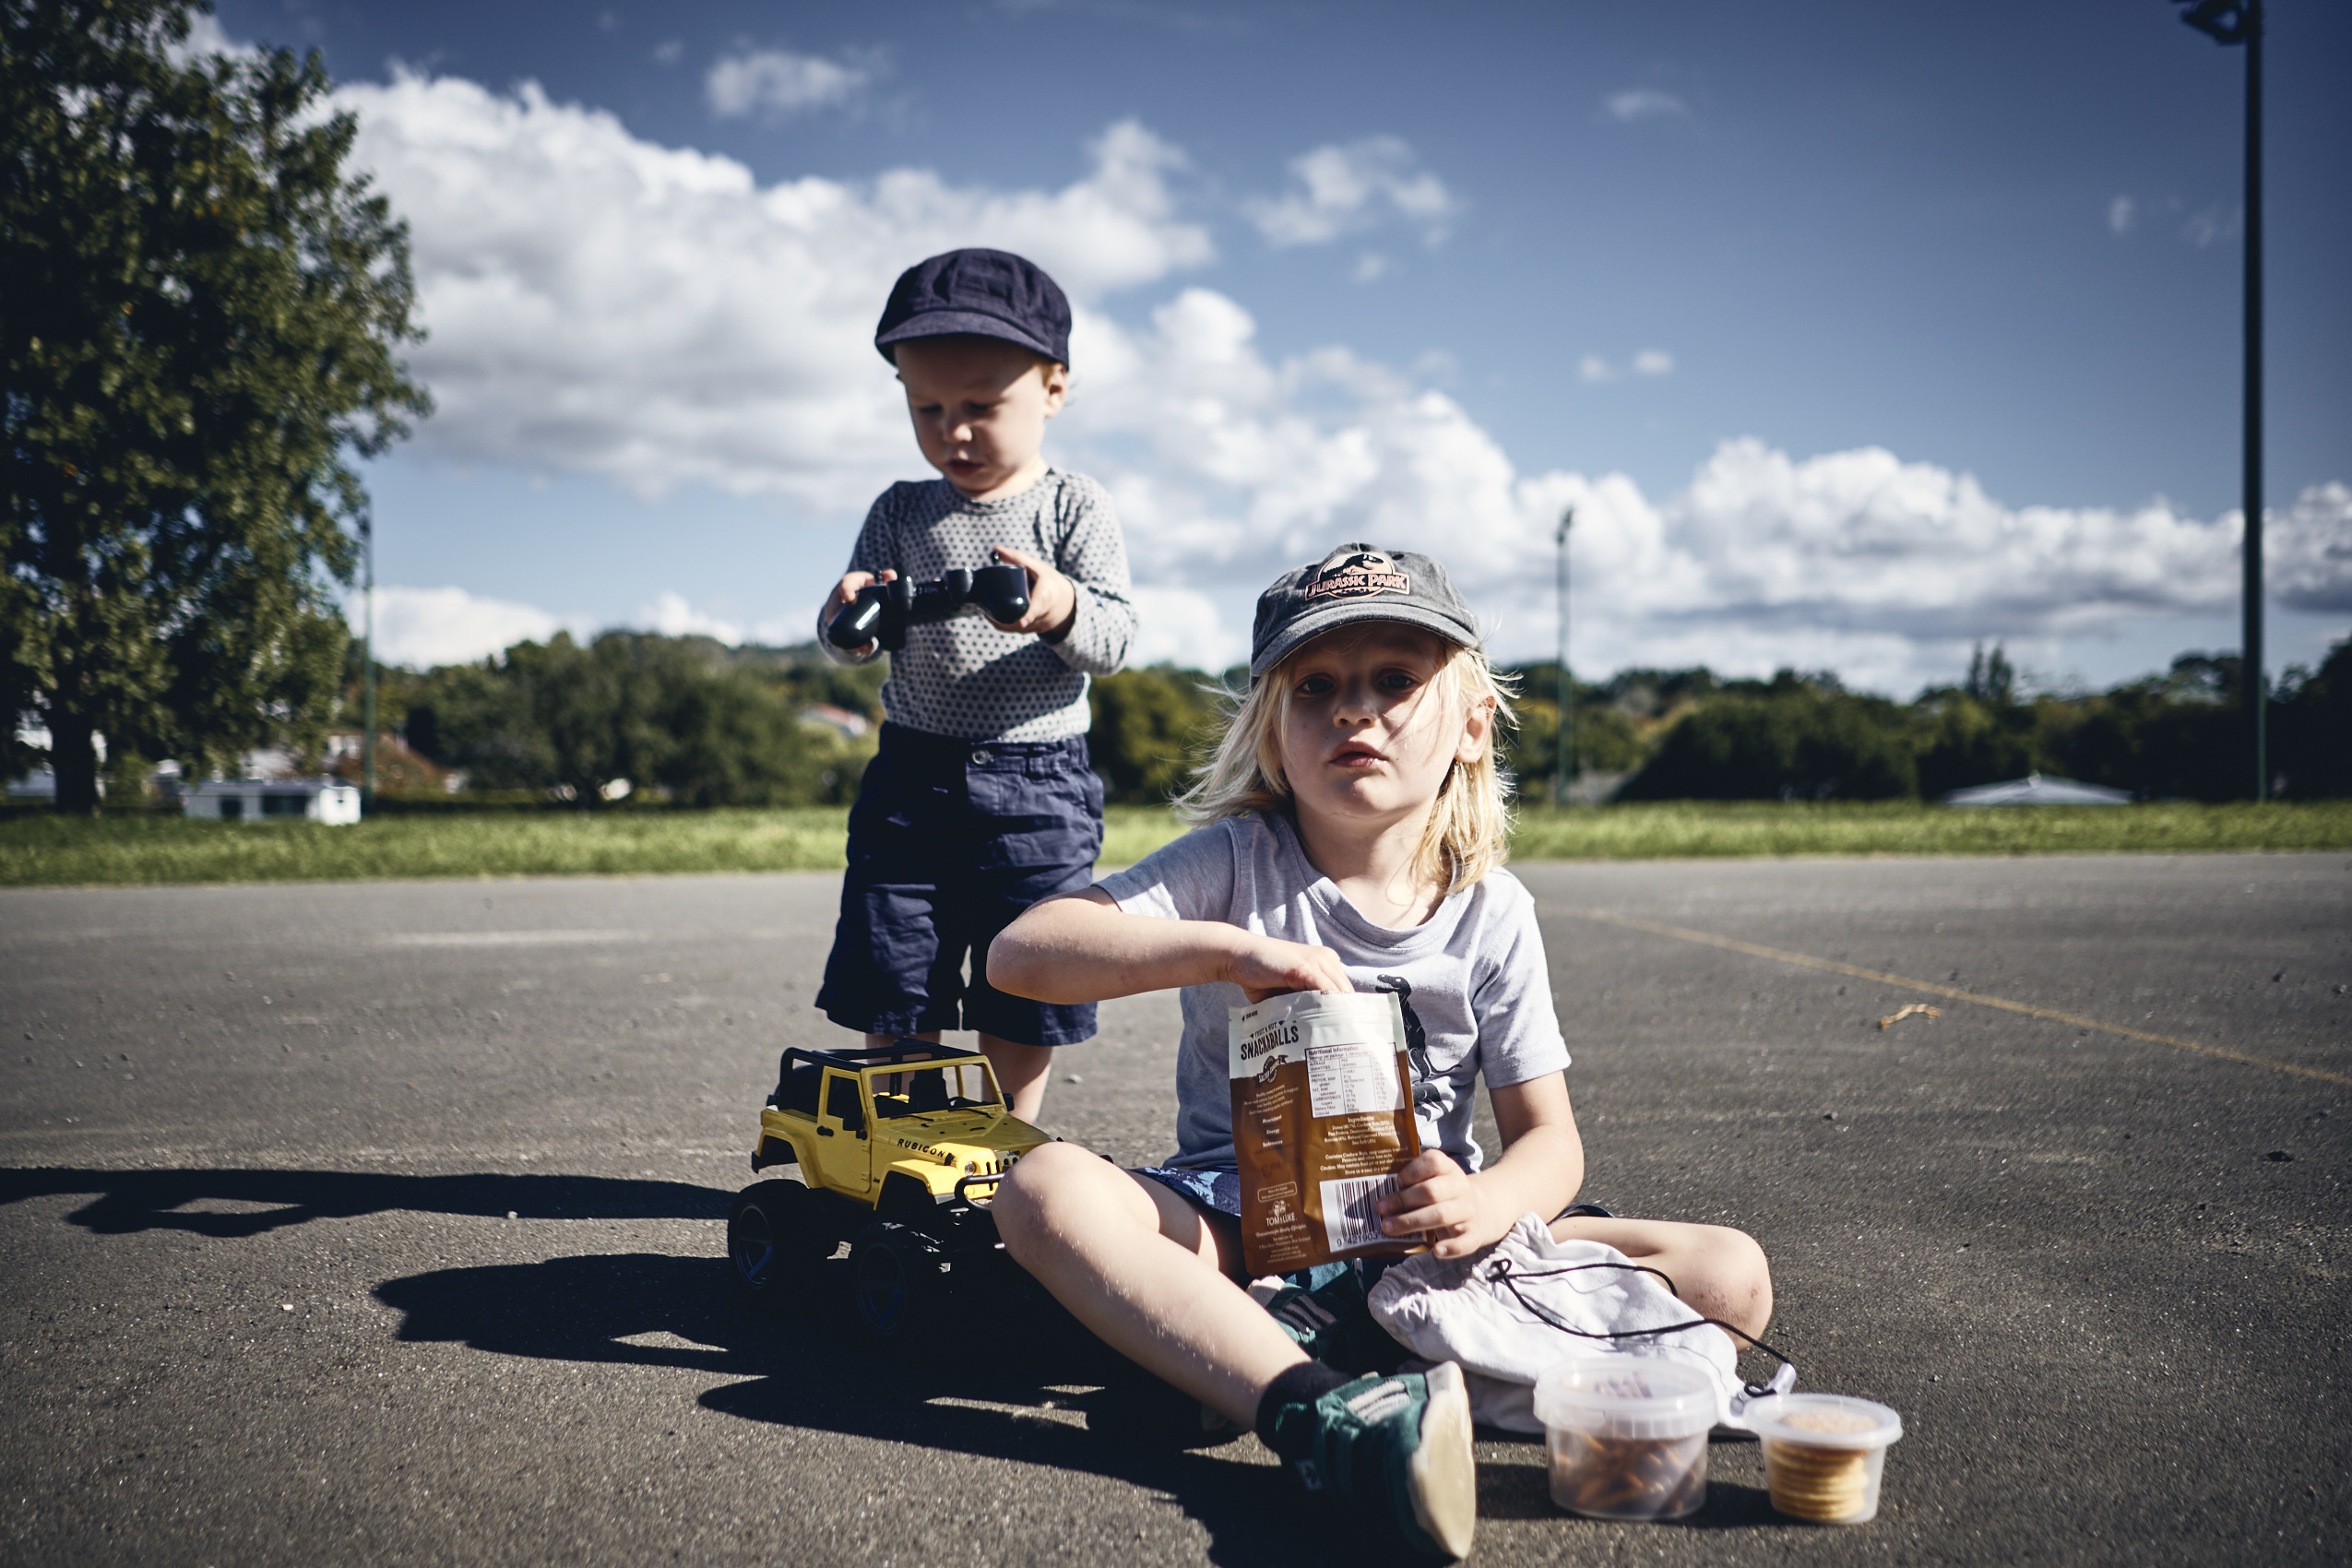 Lockdown • Boys Playing on Courts with Snacks & RC Car • Lifestyle & Portrait Photography